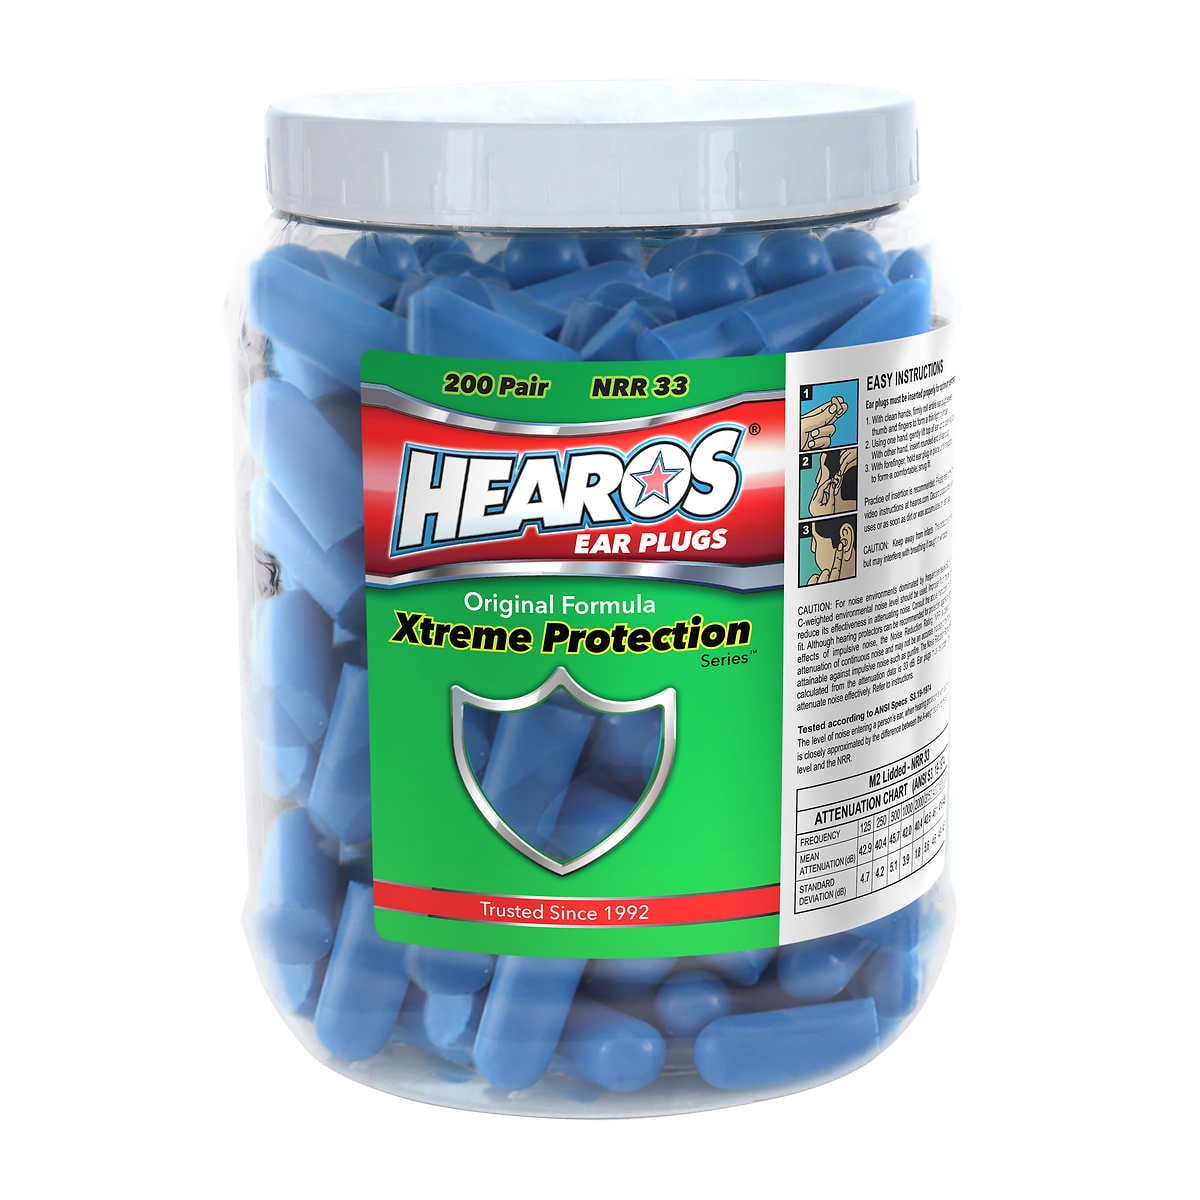 HEAROS Xtreme 100 Pair Foam Ear Plugs With NRR 33 Noise Canceling Hearing 